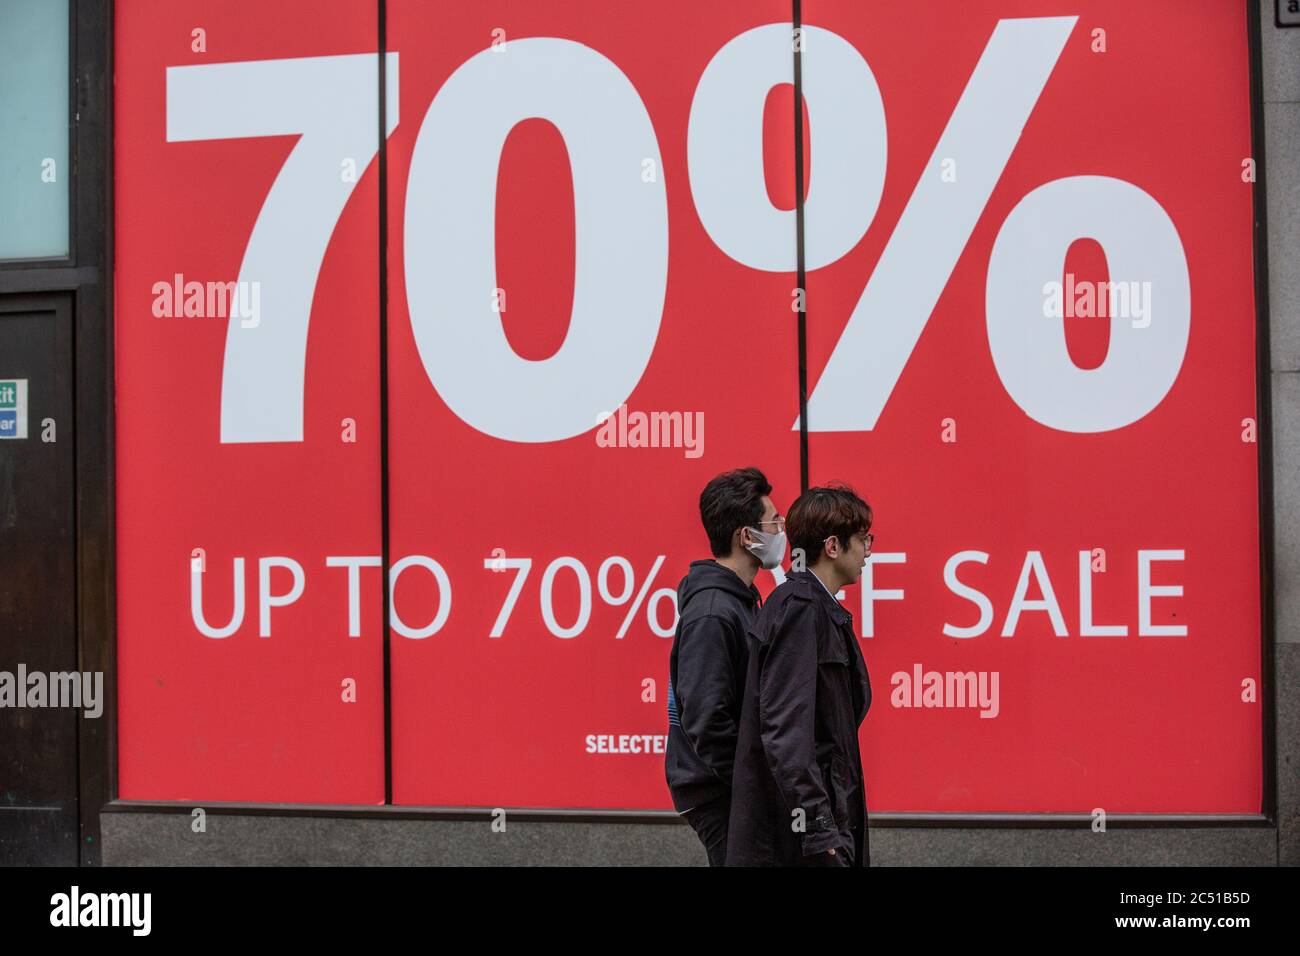 Shoppers wearing face masks walk past a large shop window advertising 70% sale reduction on Oxford Street, West End, London, UK Stock Photo